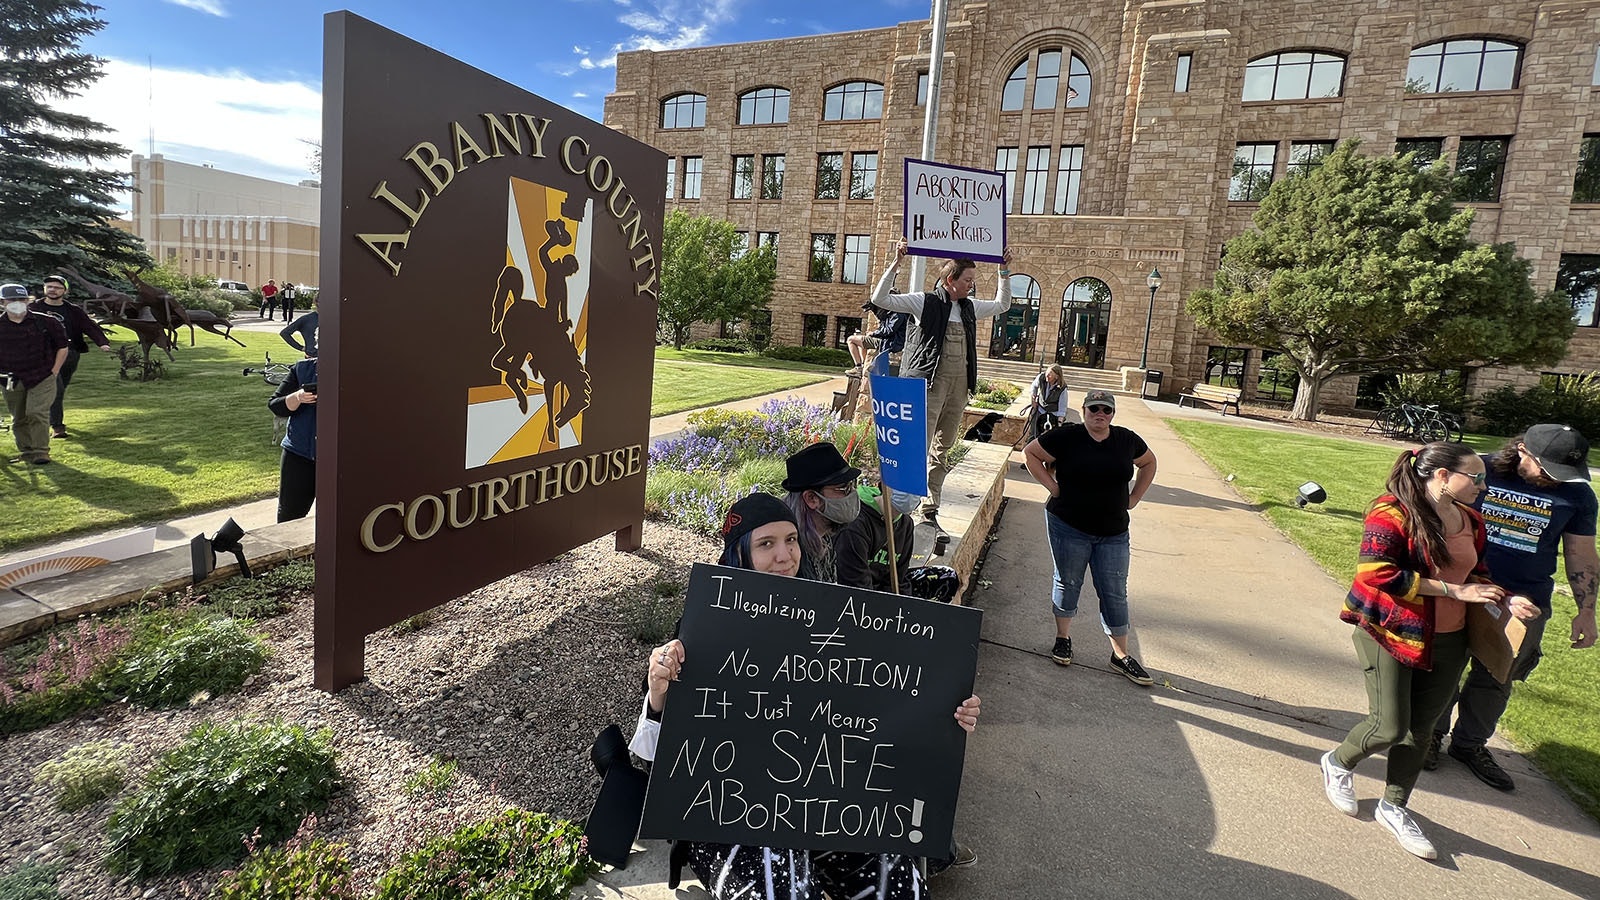 Abortion rally in laramie in june 2022 1 15 23